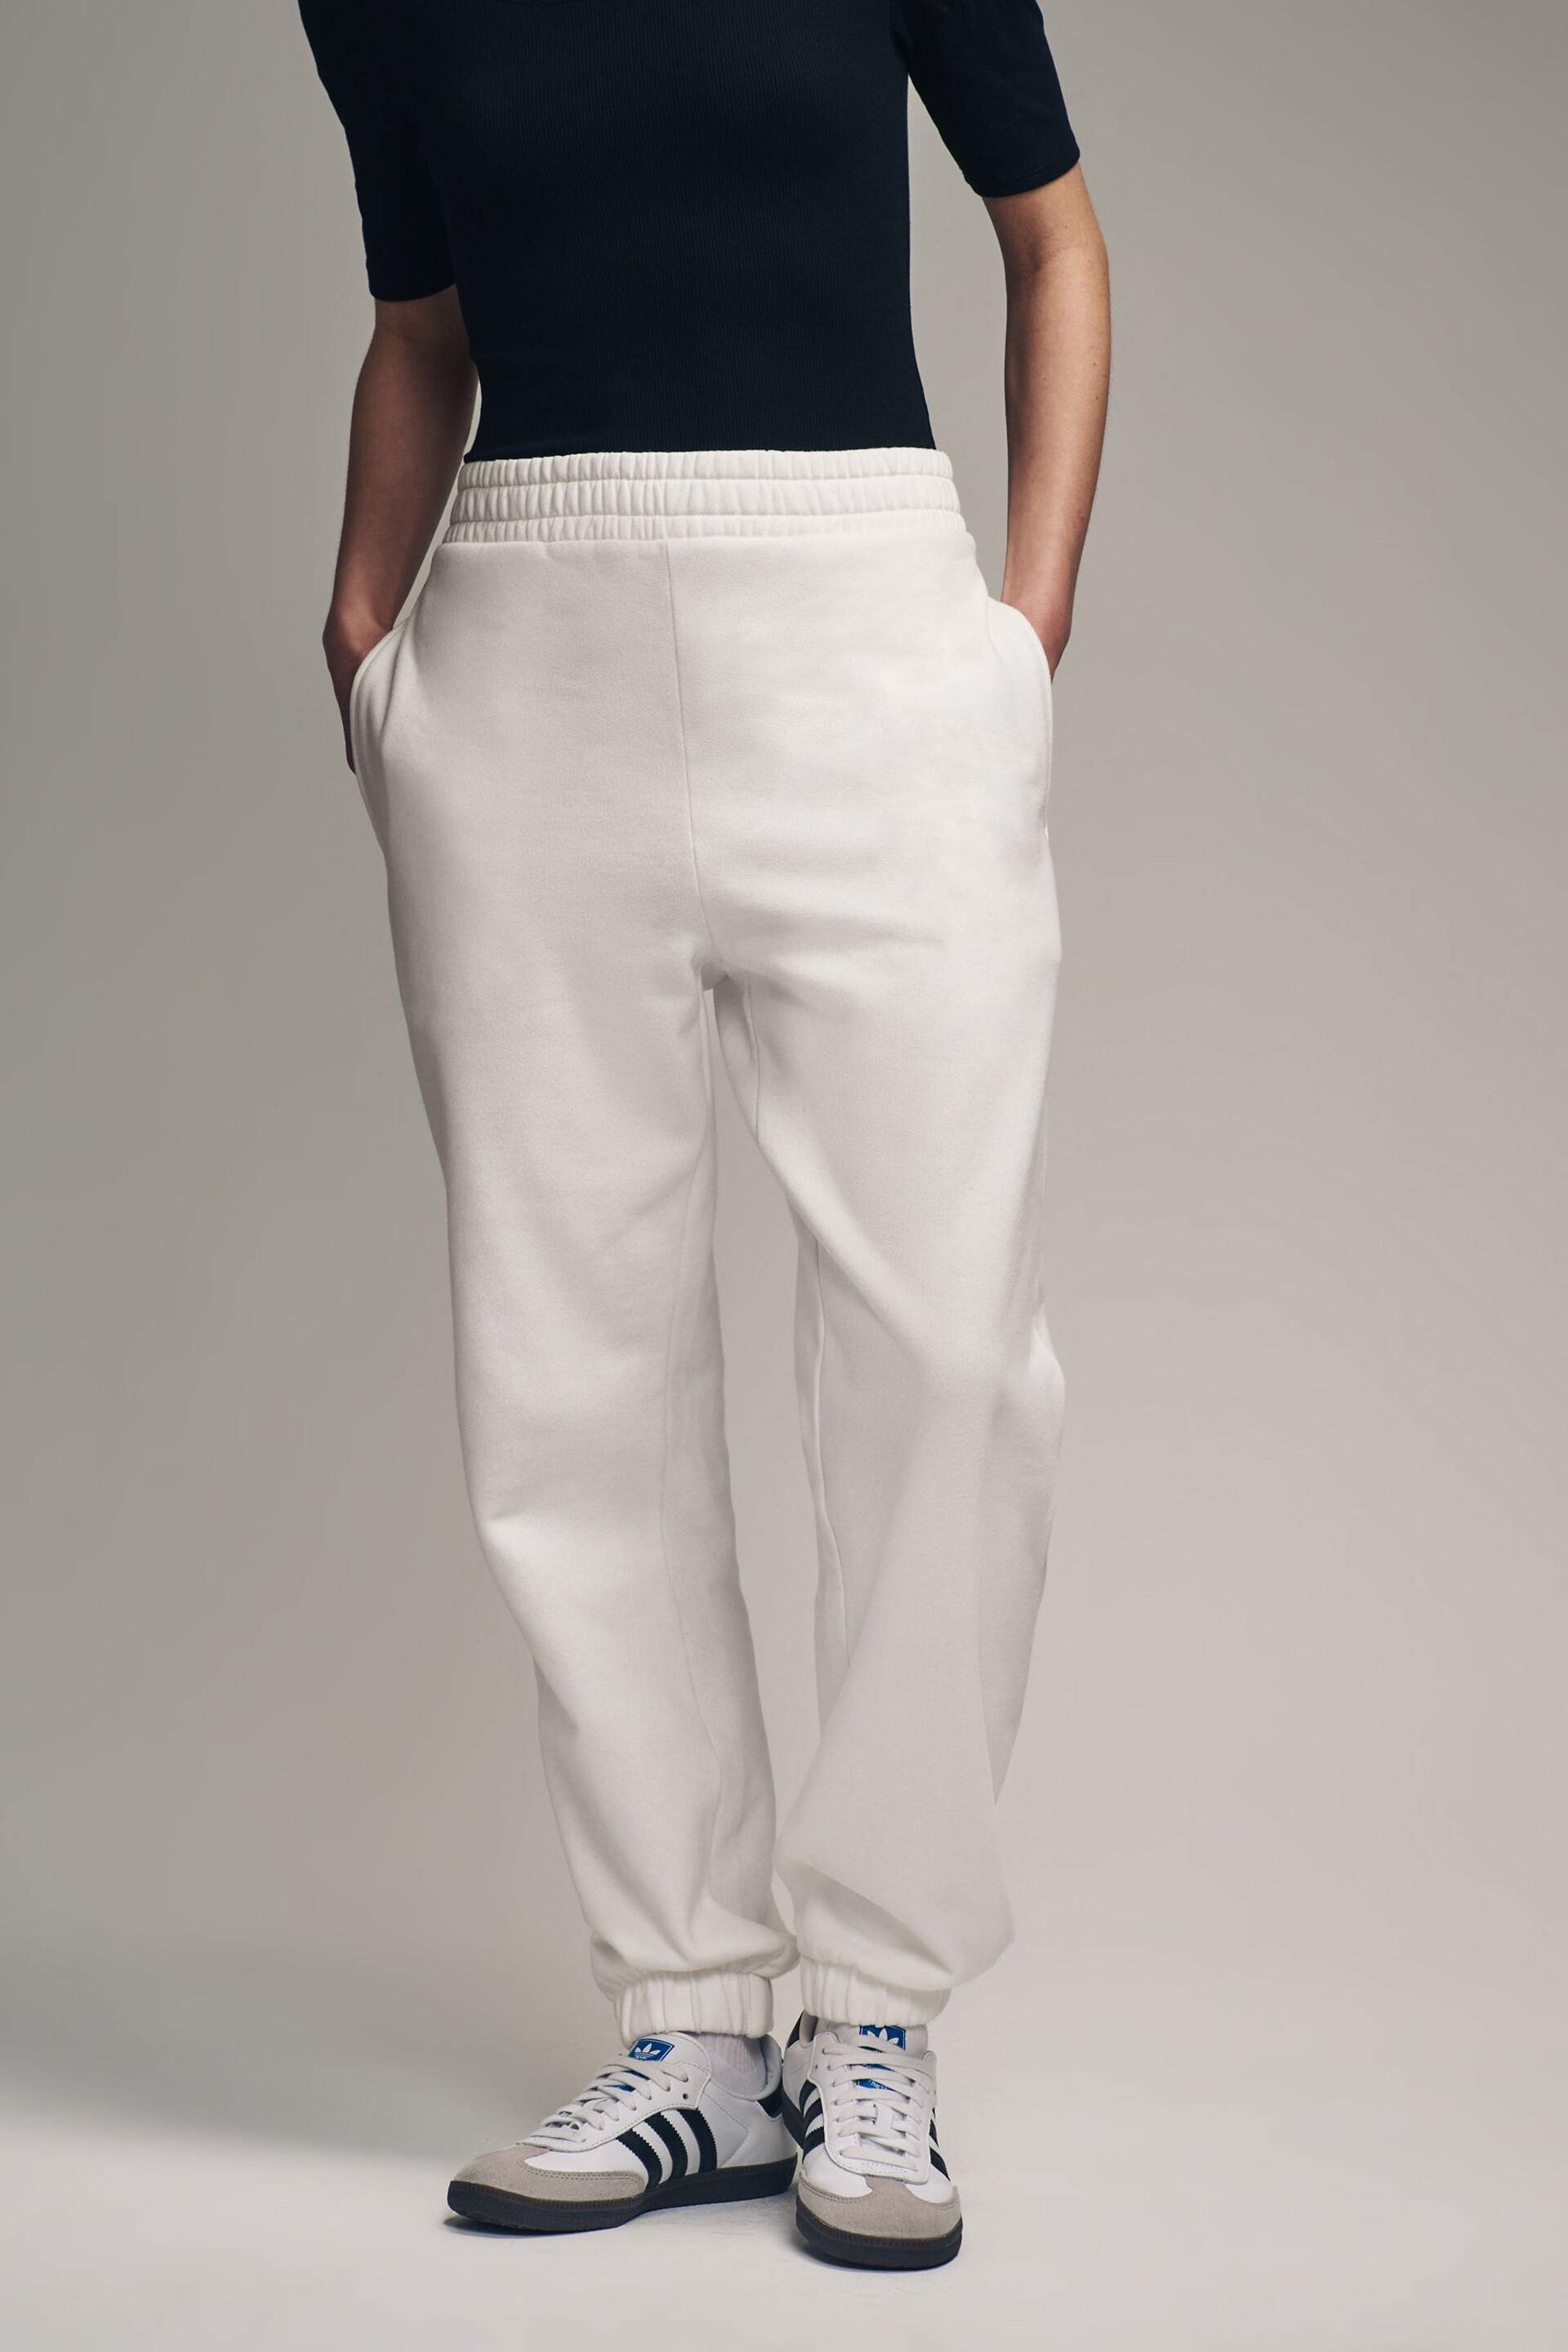 The Set Mink Brown/Cream Cuffed Joggers 2 Pack - Image 8 of 12